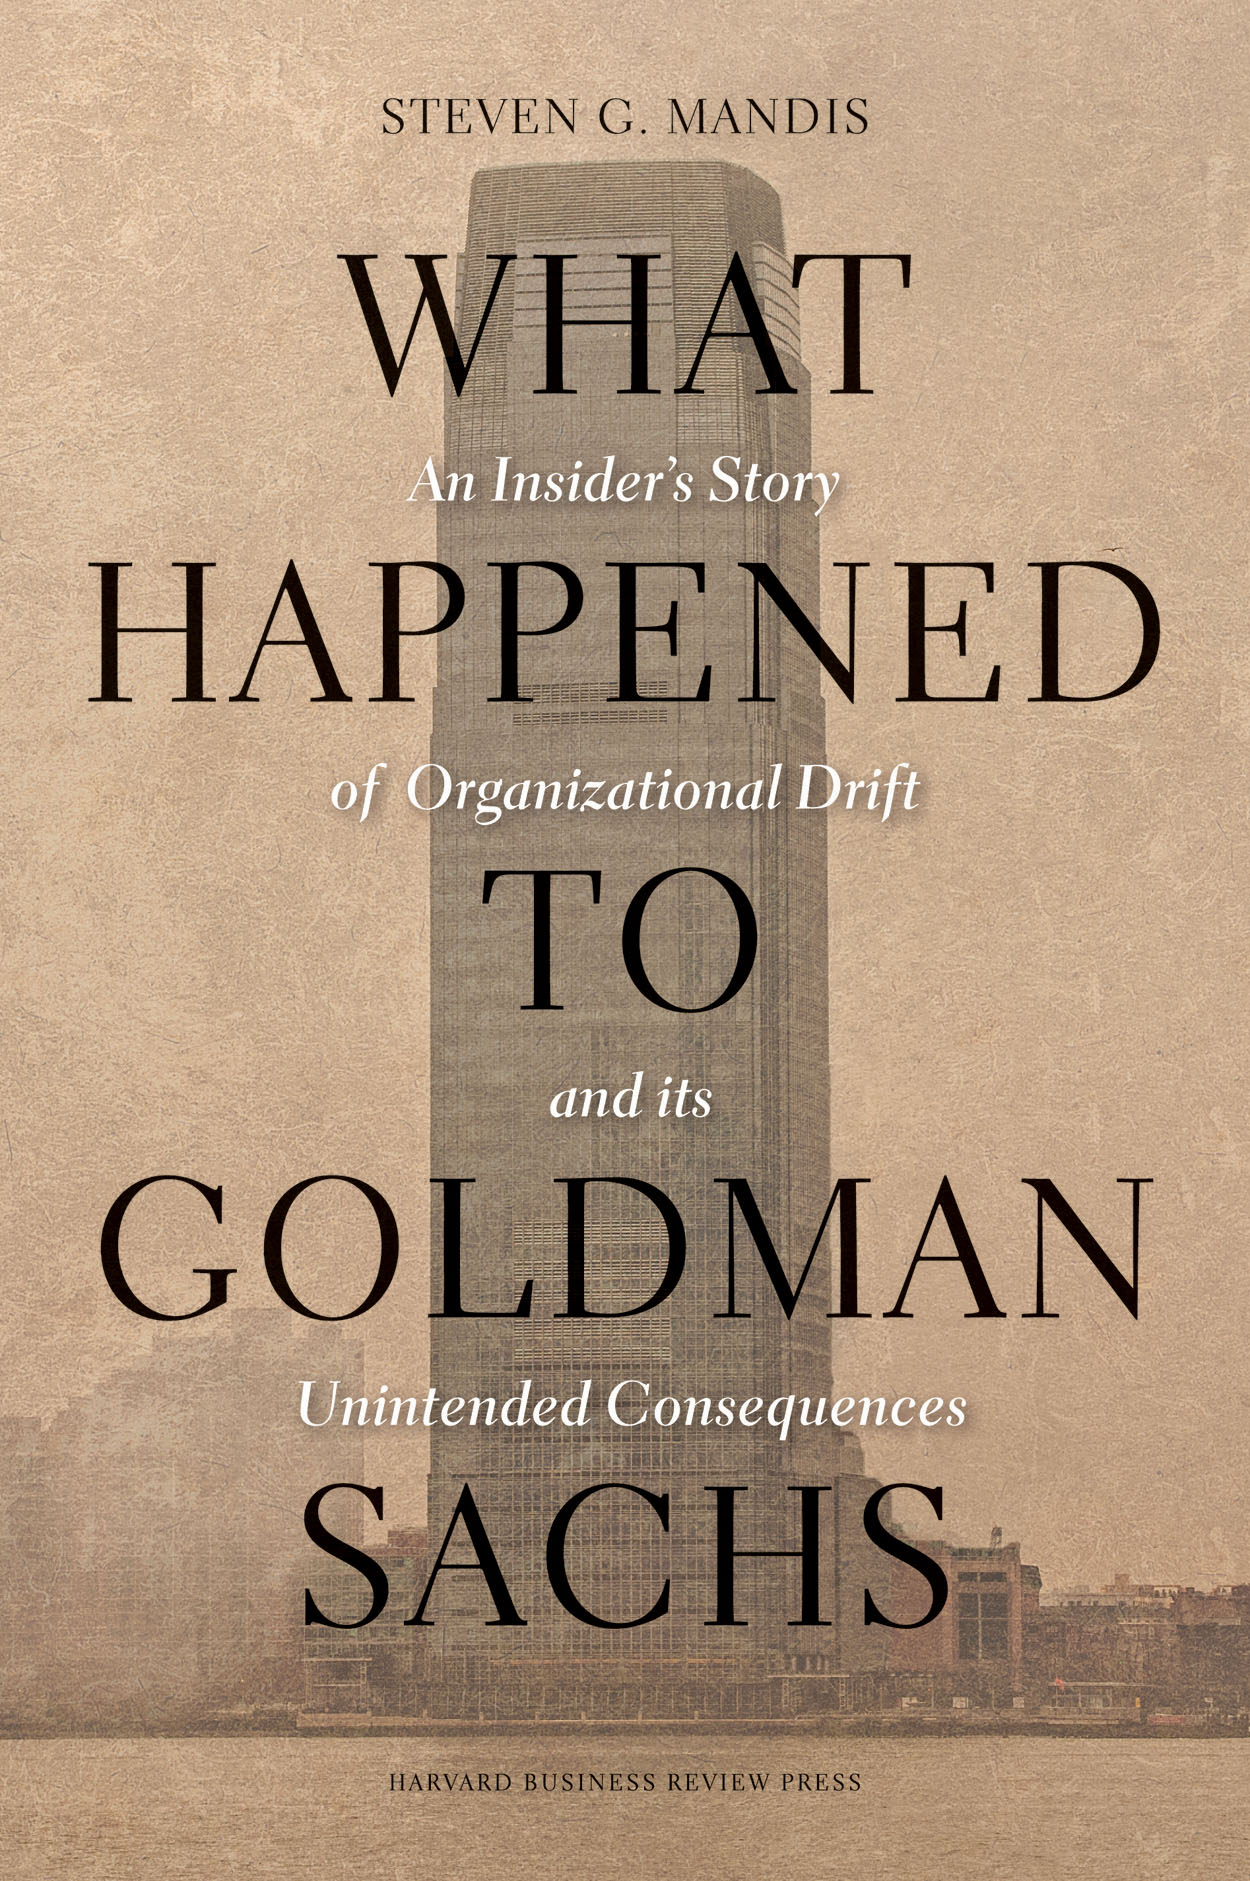 Steven G. Mandis, author of What Happened to Goldman Sachs, in conversation with Justin Fox